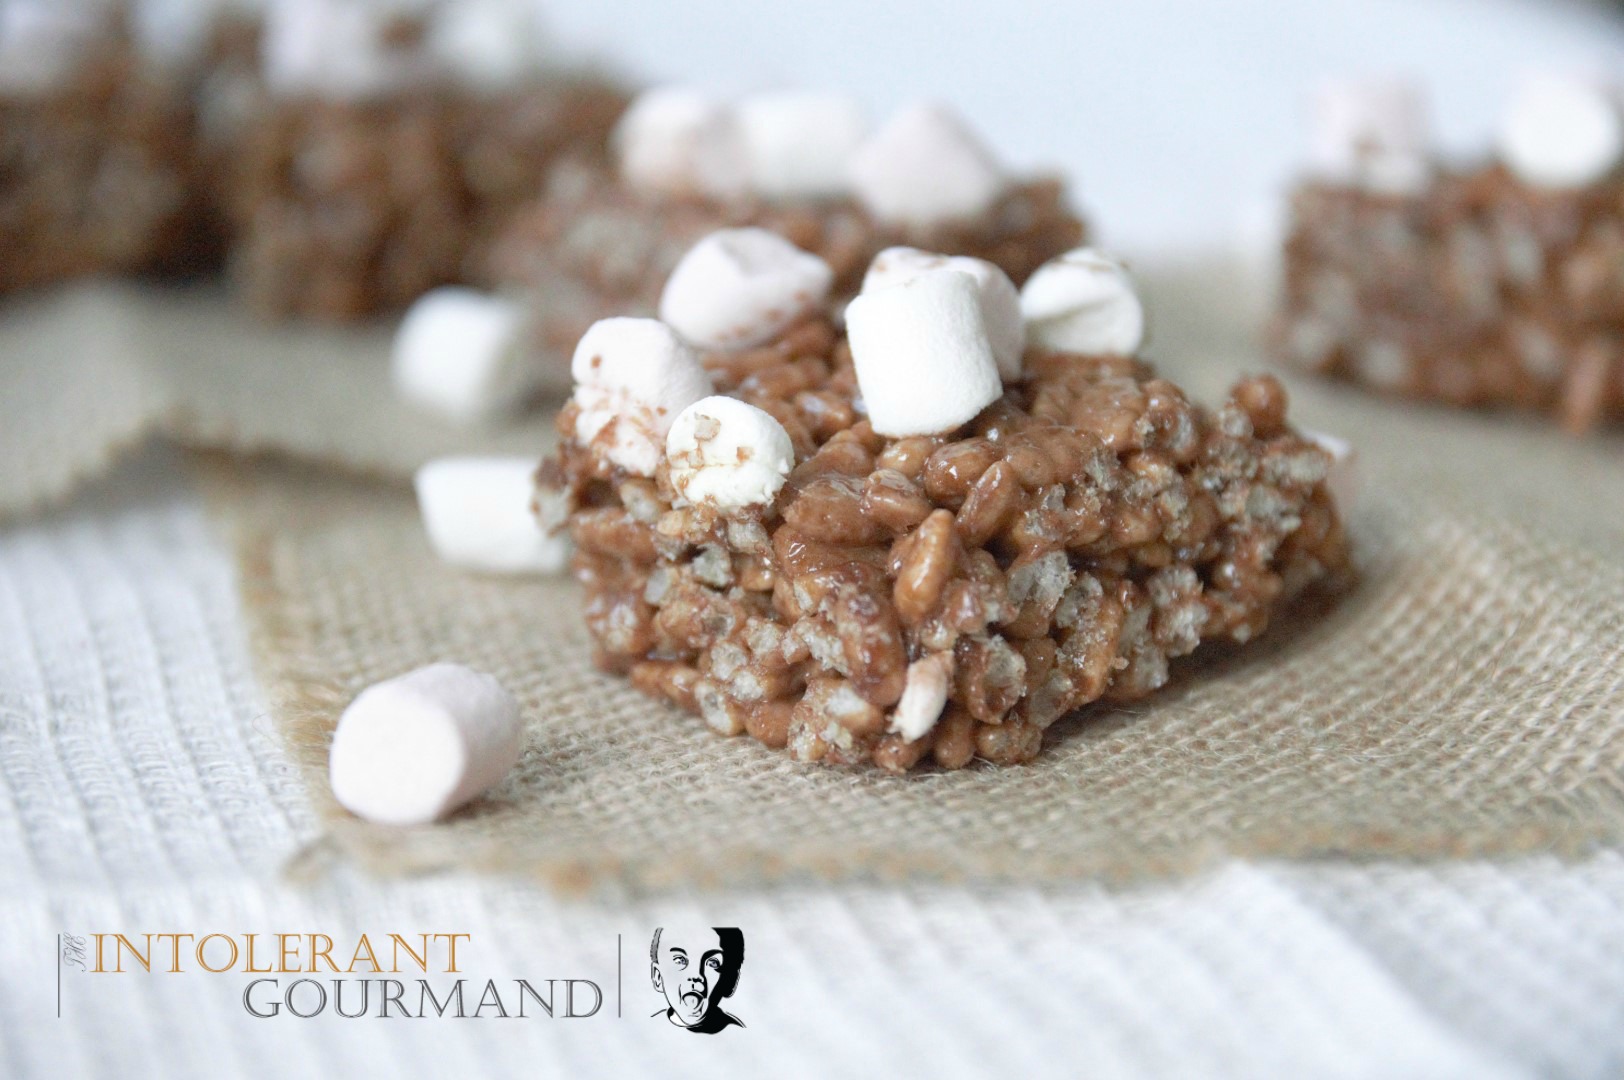 Chocolate marshmallow crispie squares - dairy-free, gluten-free, wheat-free, egg-free, nut-free, vegan and delicious! www.intolerantgourmand.com